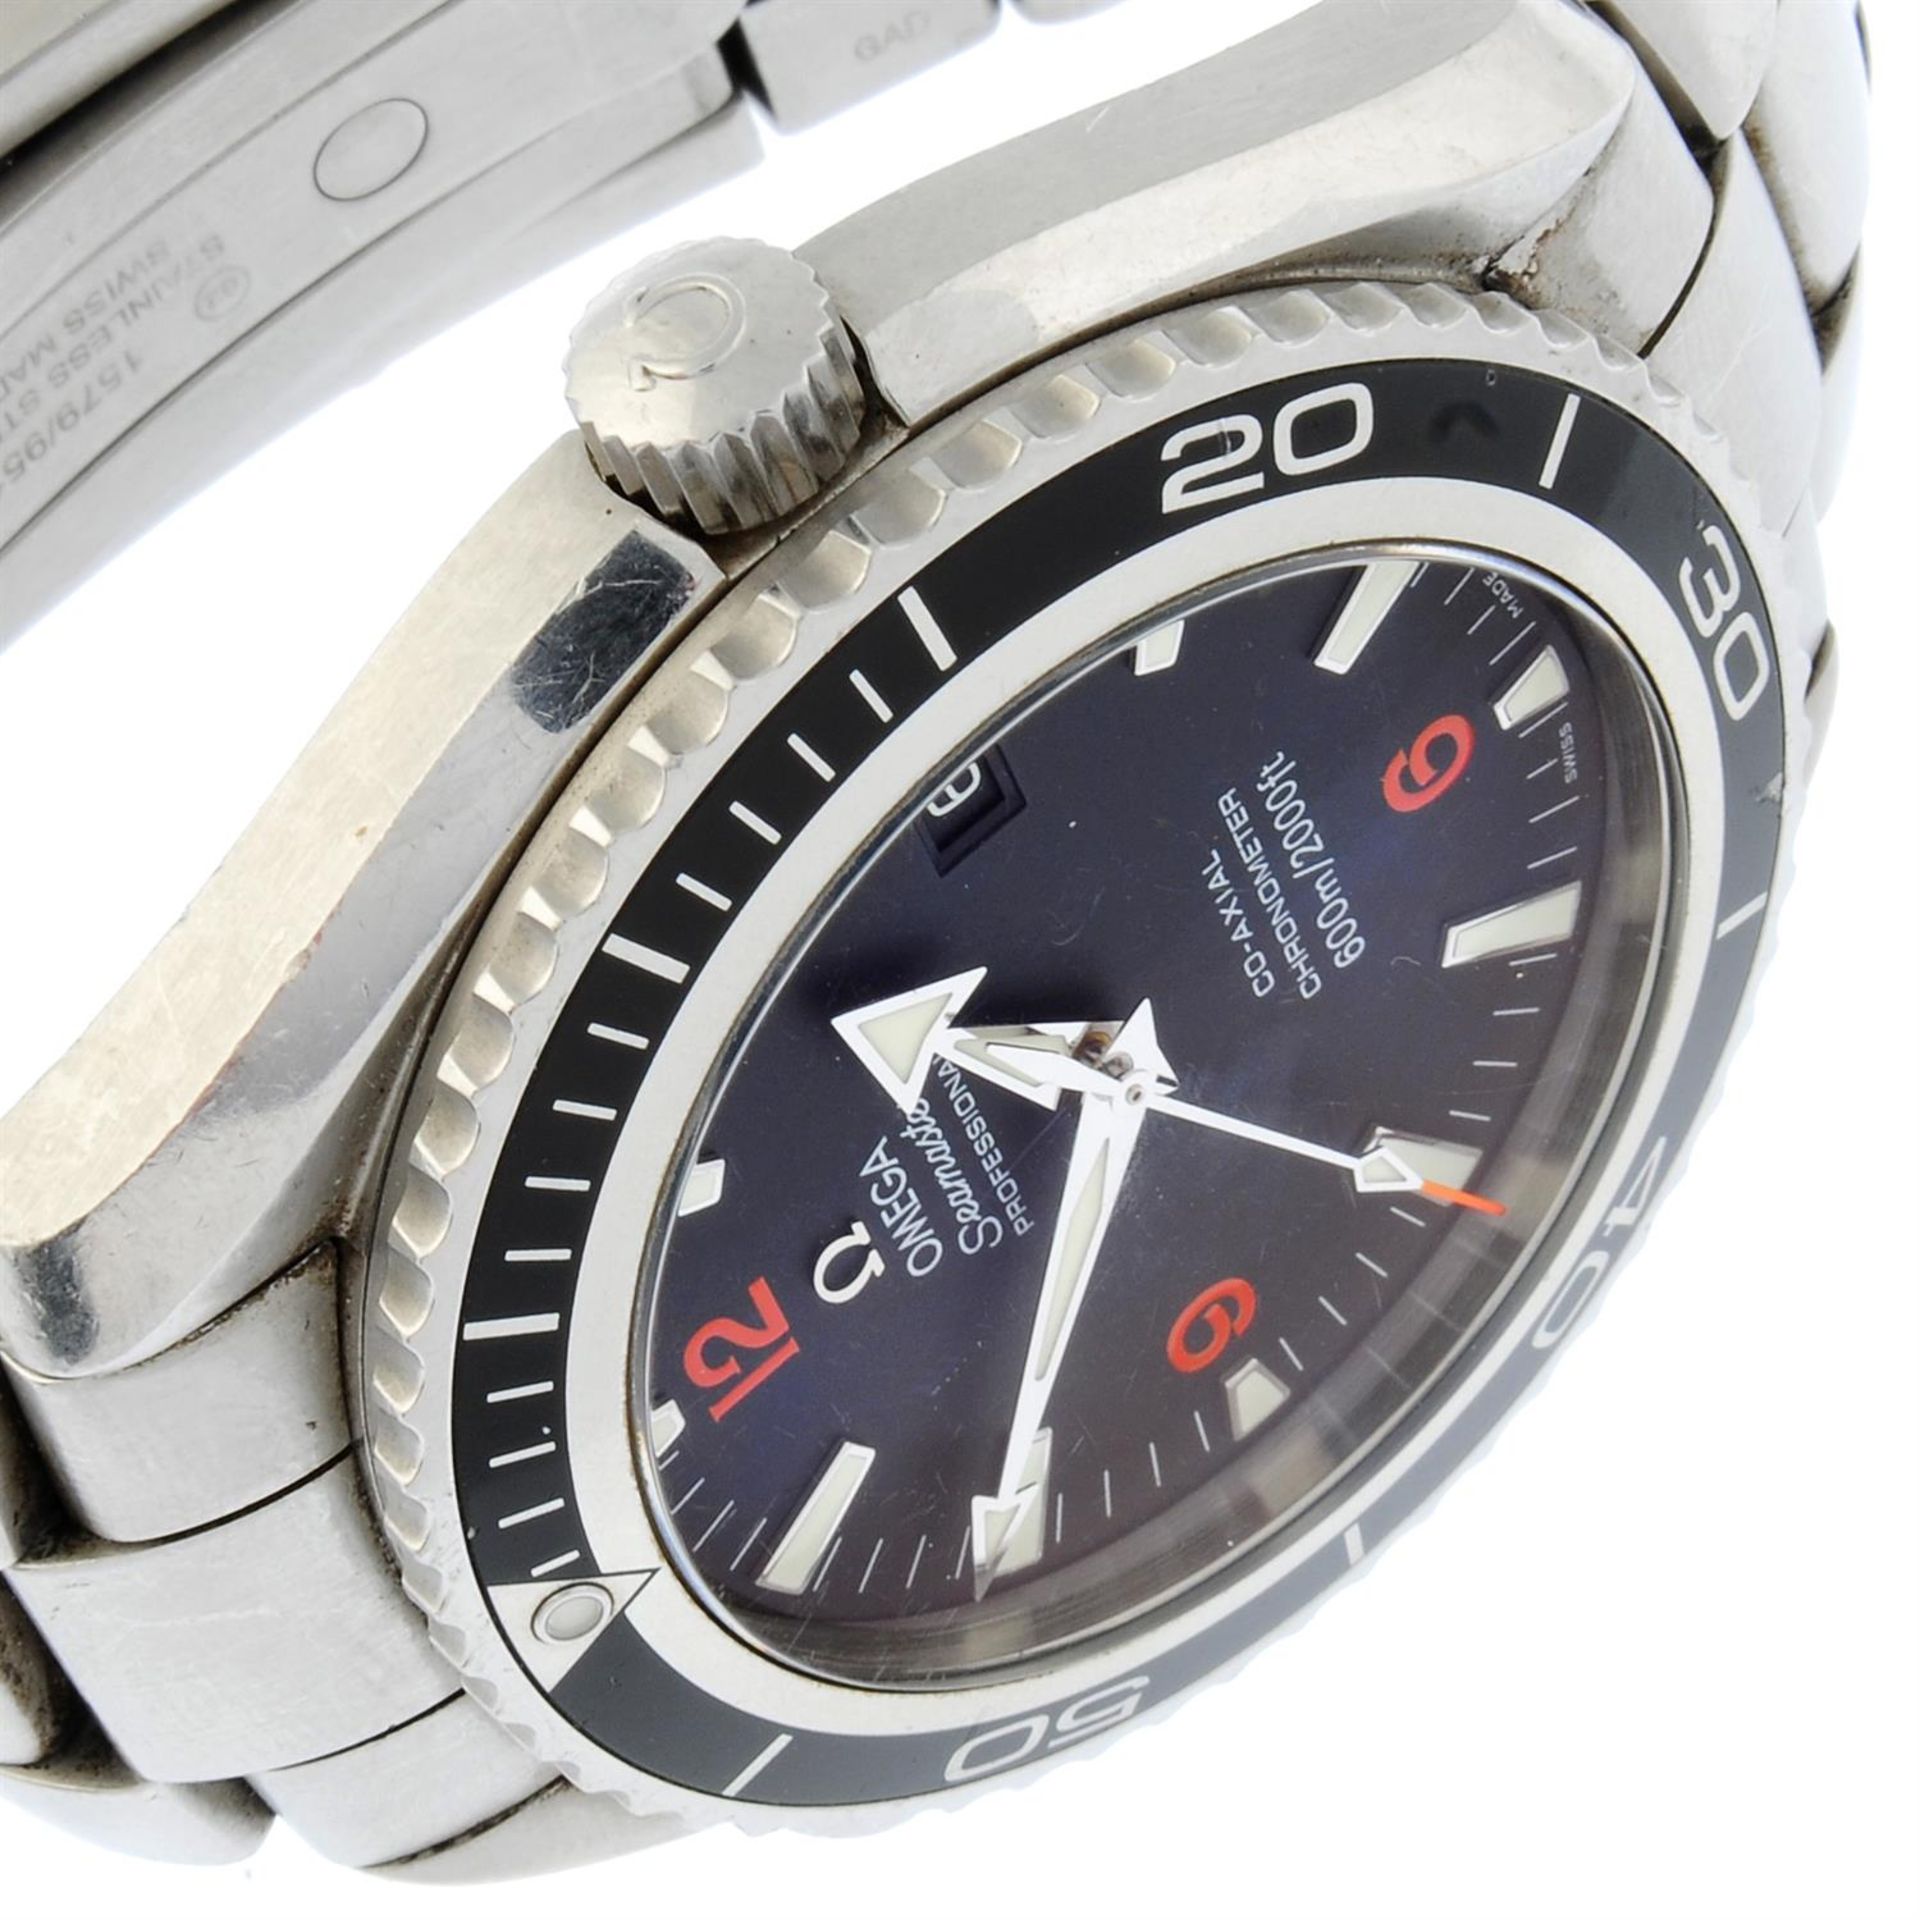 Omega - a Seamaster Planet Ocean watch, 45mm. - Image 3 of 6